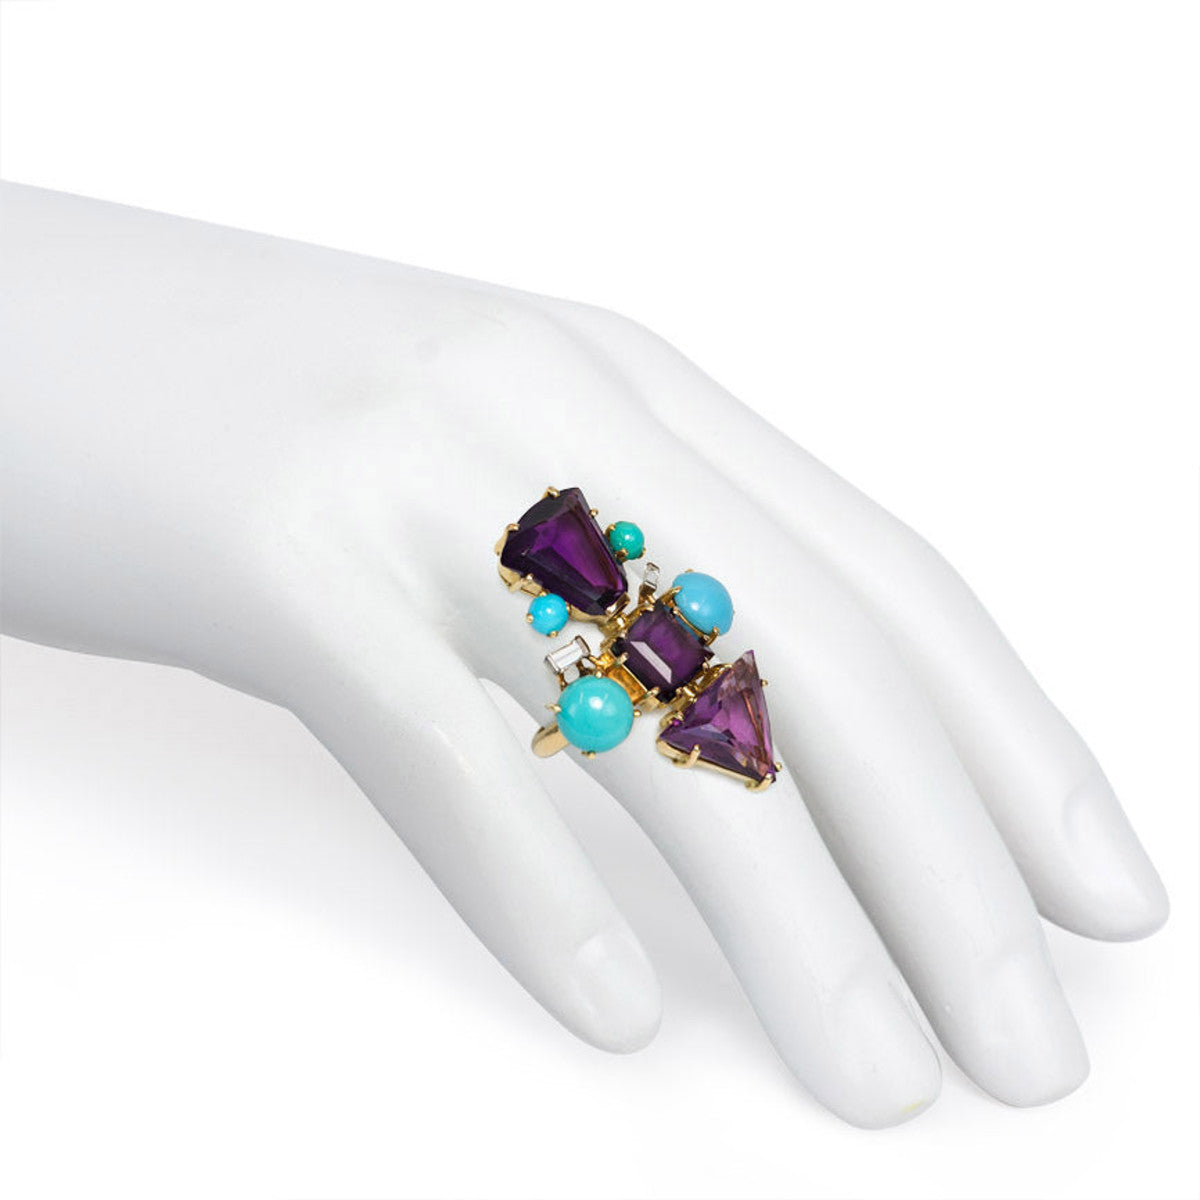 French 1950s 18KT Yellow Gold Amethyst, Diamond & Turquoise Ring on finger